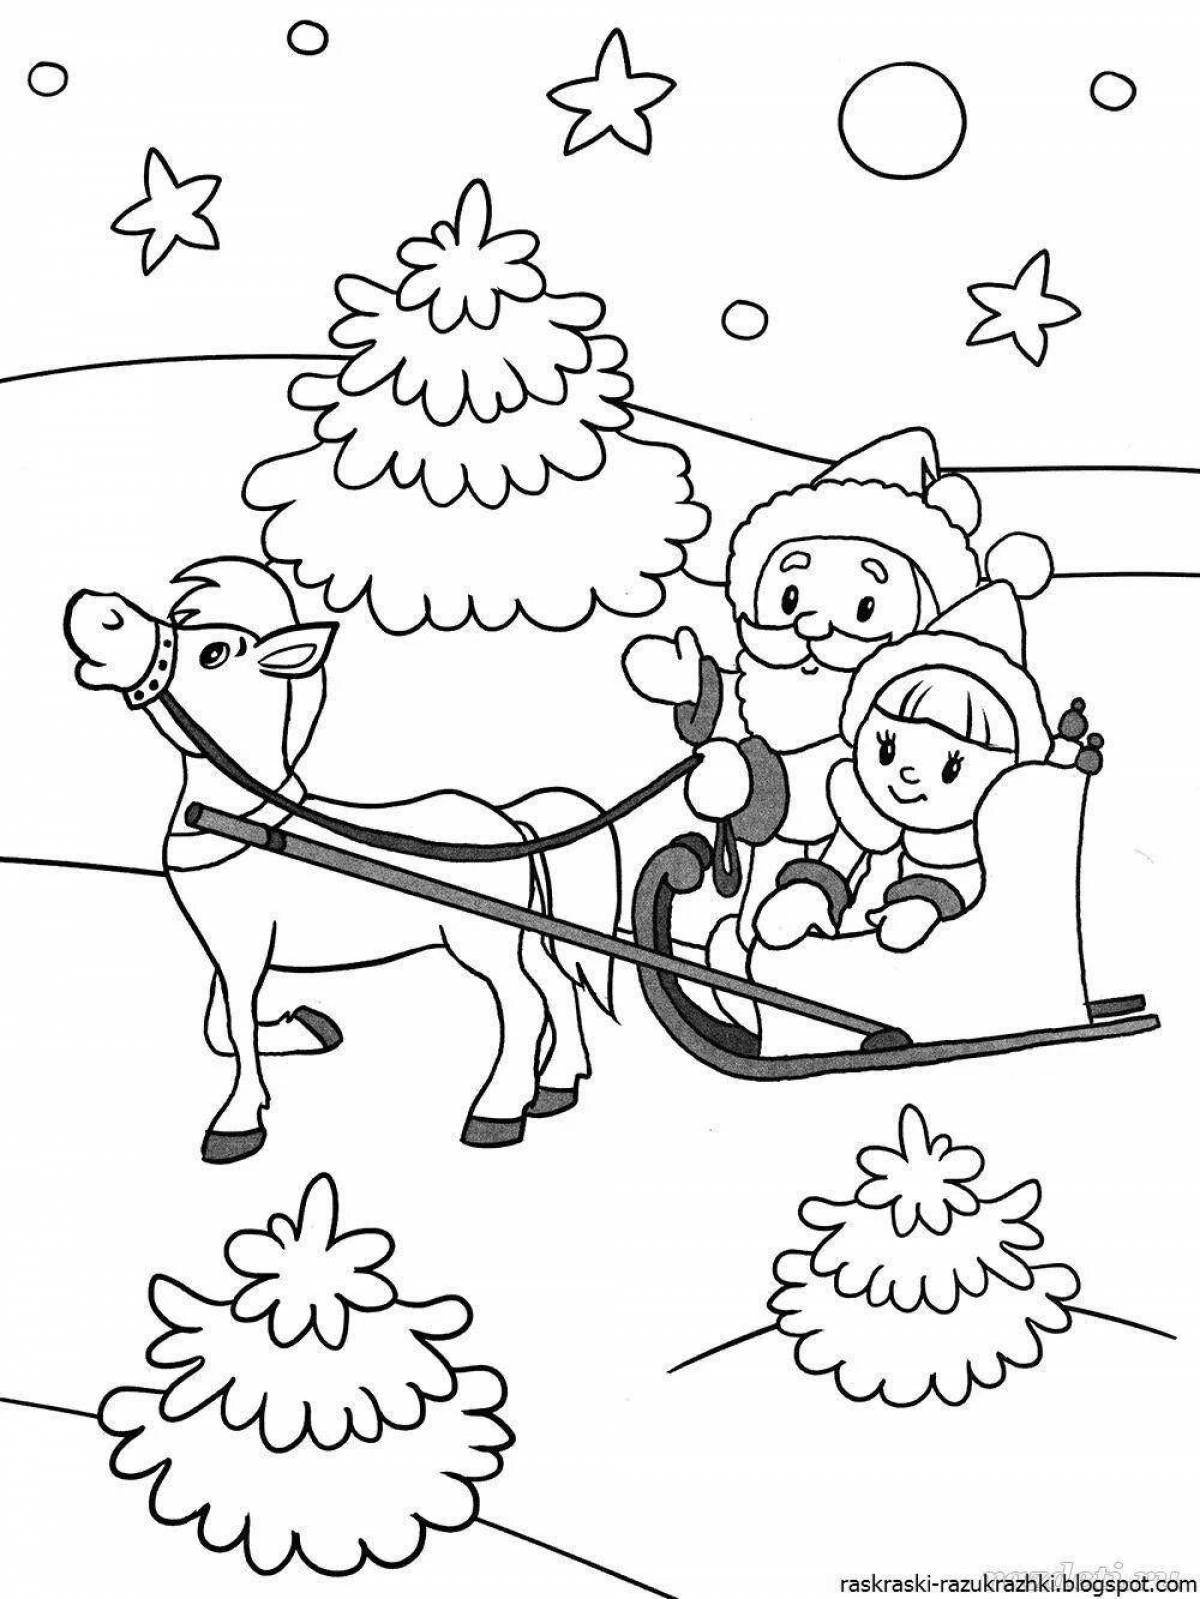 Stimulating coloring book winter fun for children 3-4 years old in kindergarten